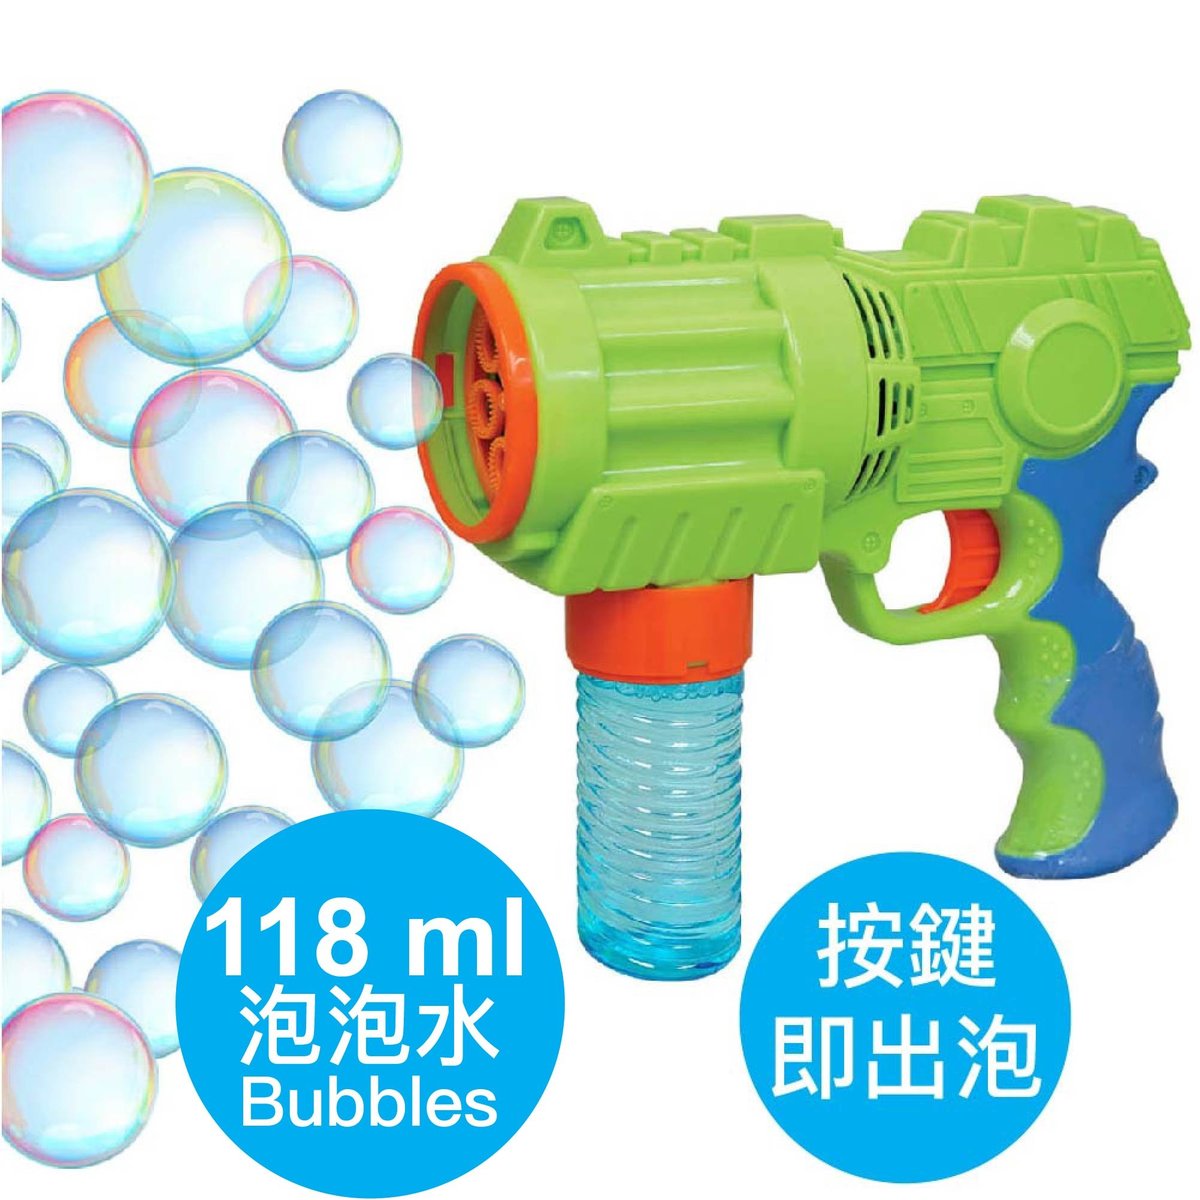 (Improved Version) Bubble Blaster Gun - 1 Bubble Solution (118ml) included - Battery Operated